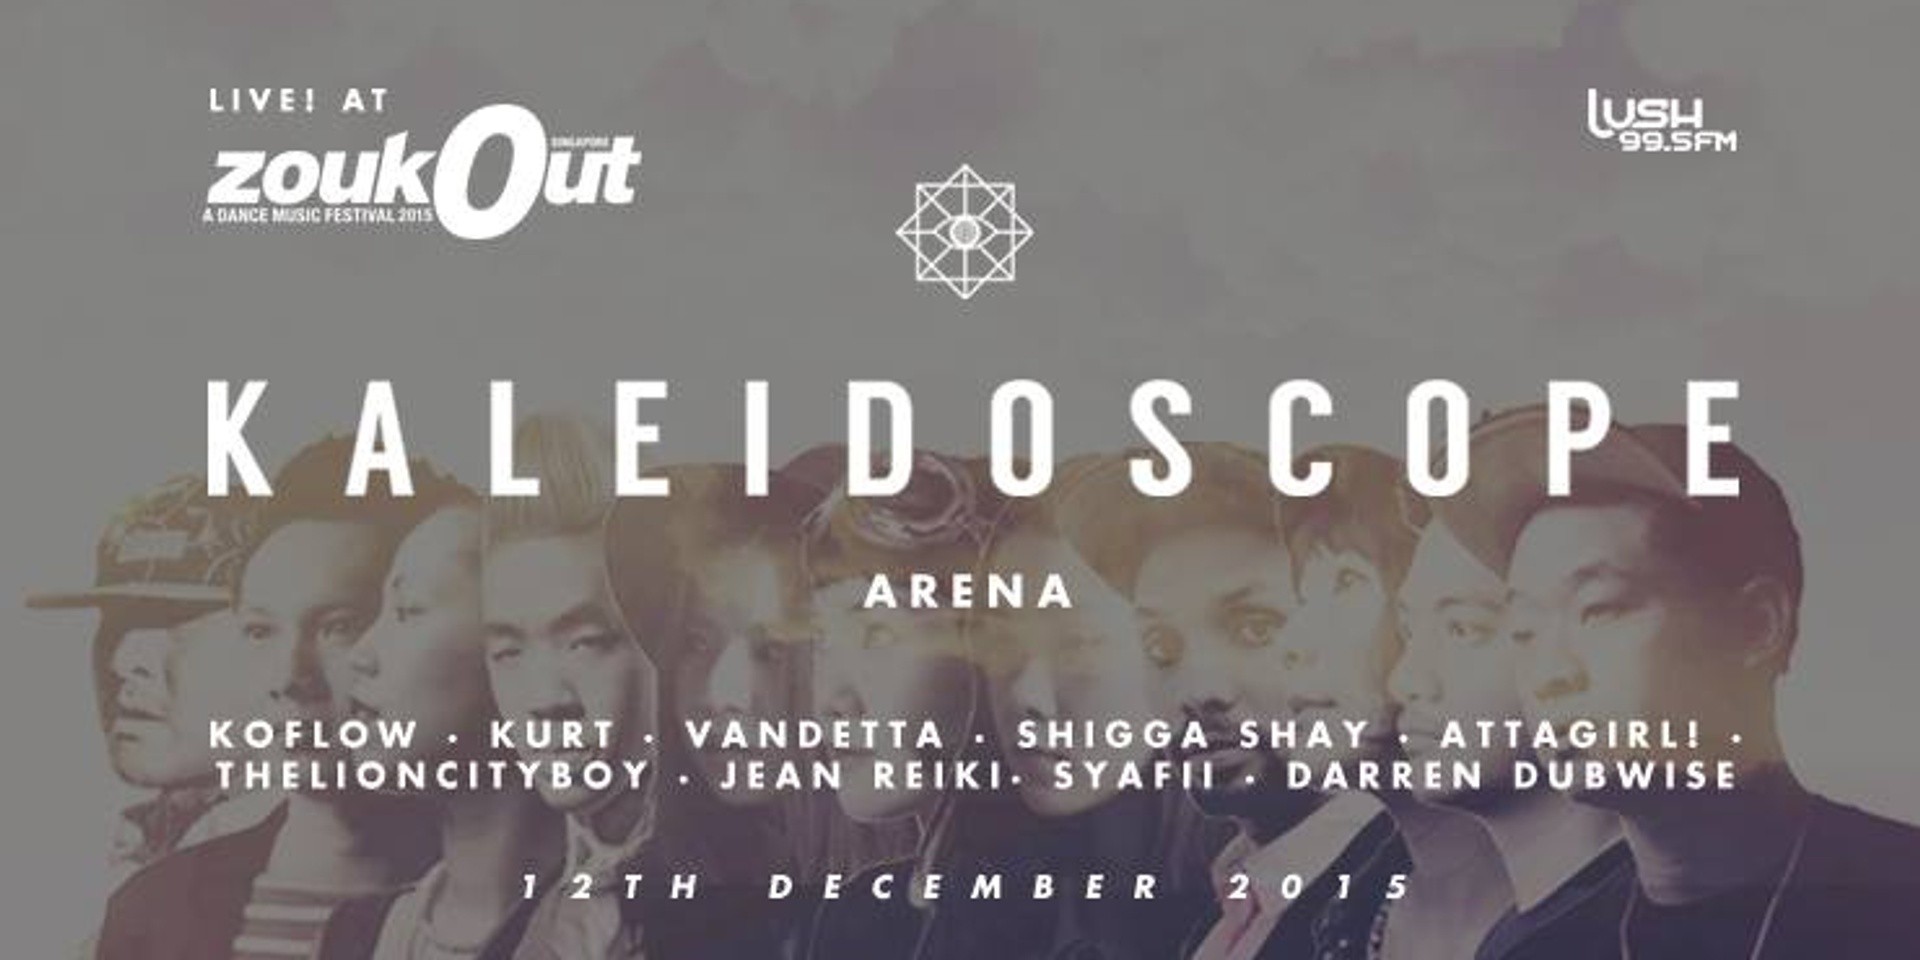 Lush 99.5 packs ZoukOut 2015's Kaleidoscope Arena with amazing local talent